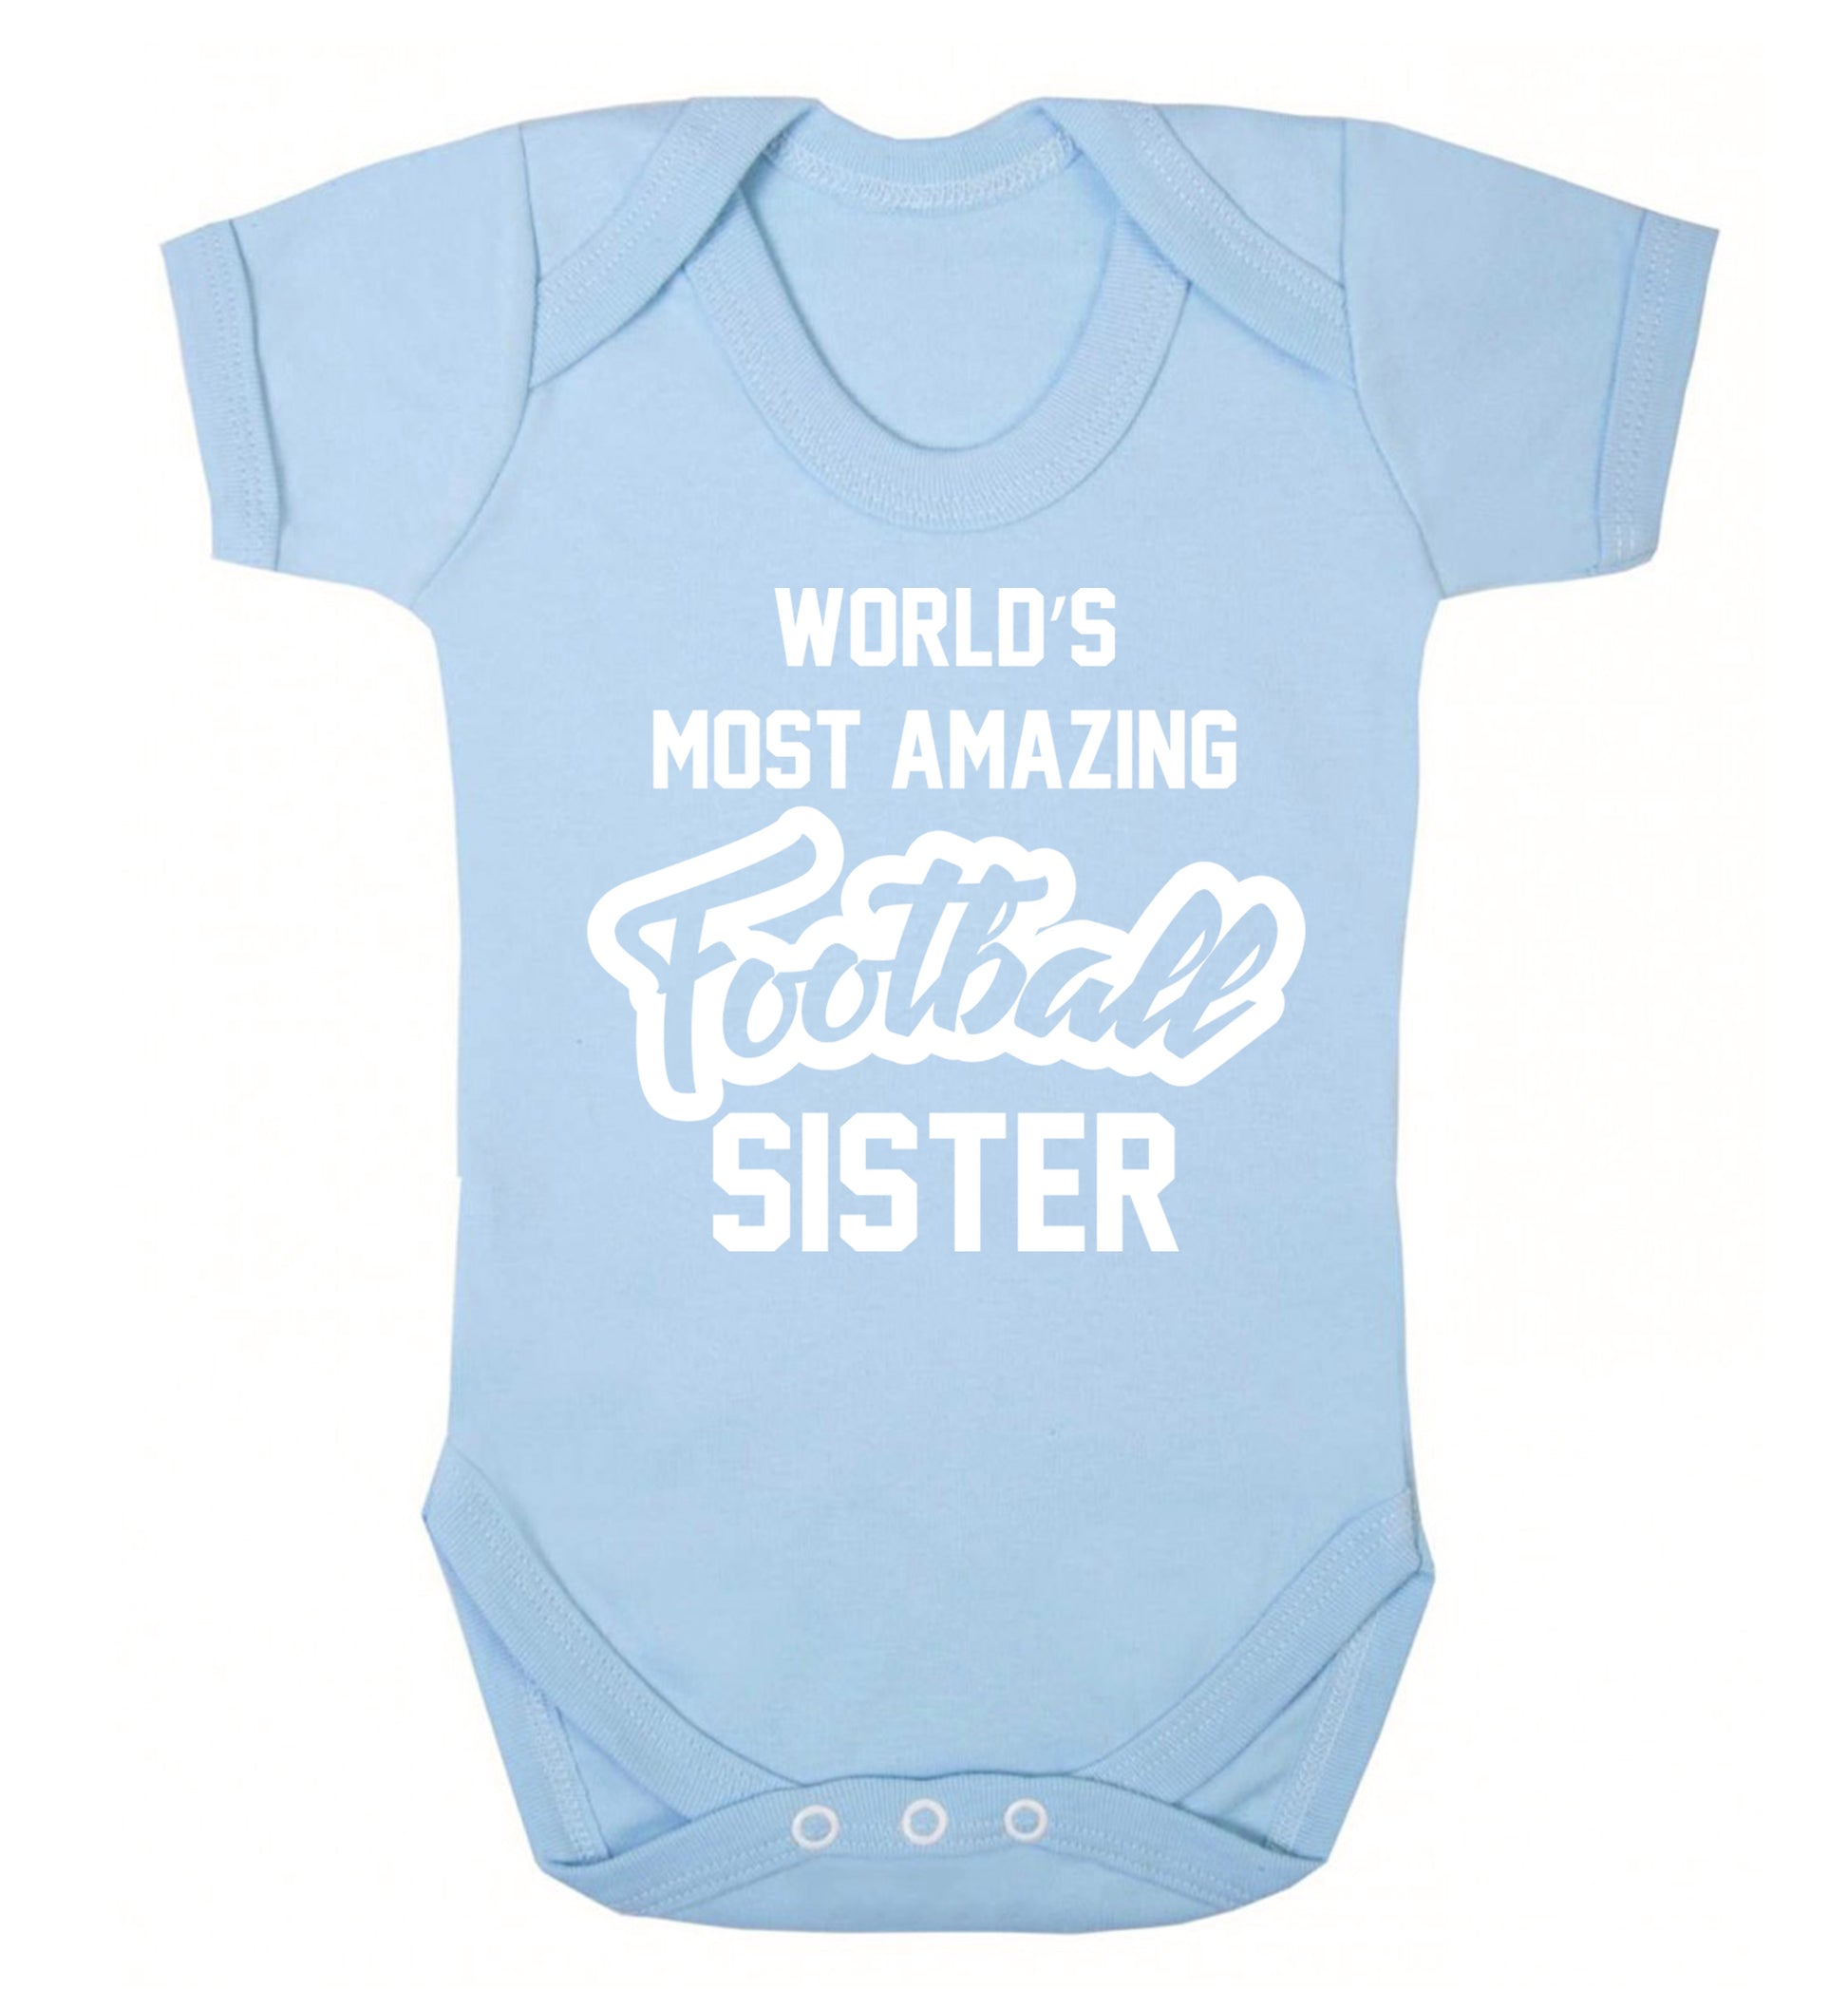 Worlds most amazing football sister Baby Vest pale blue 18-24 months